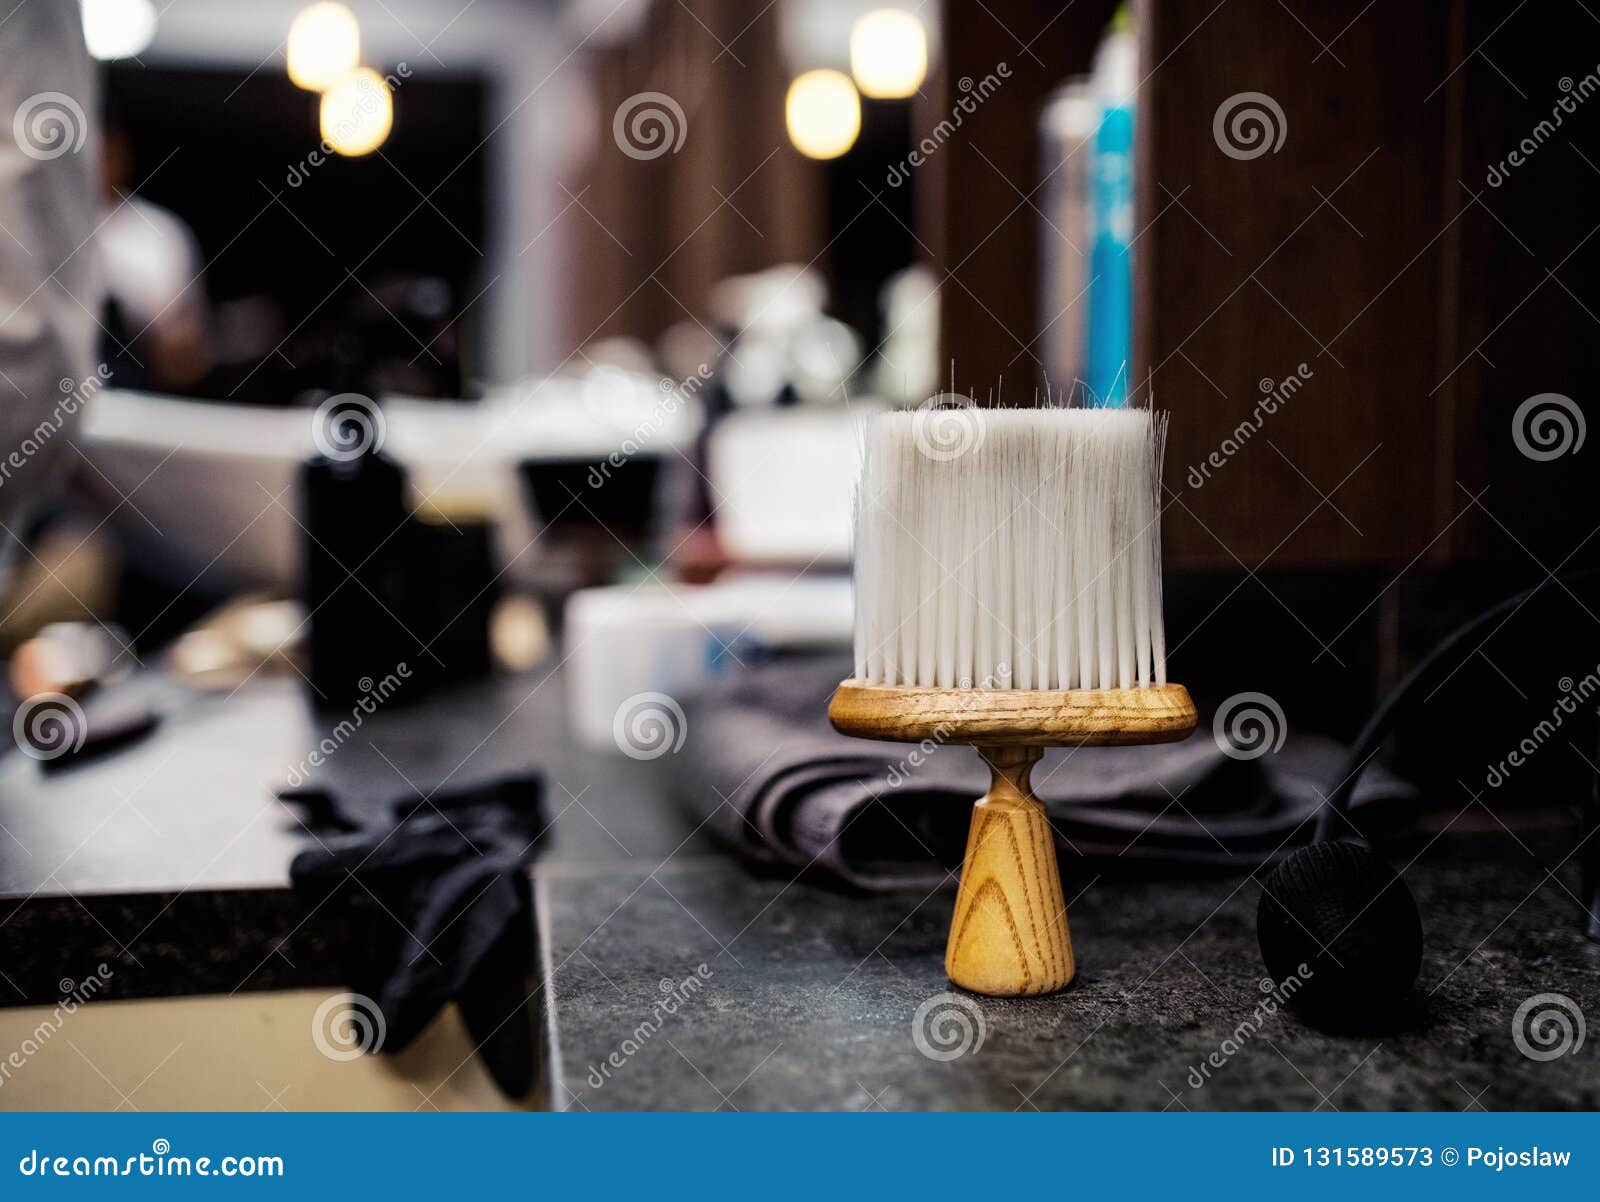 A Hair Dust Brush And Other Tools In Hair Salon For Men